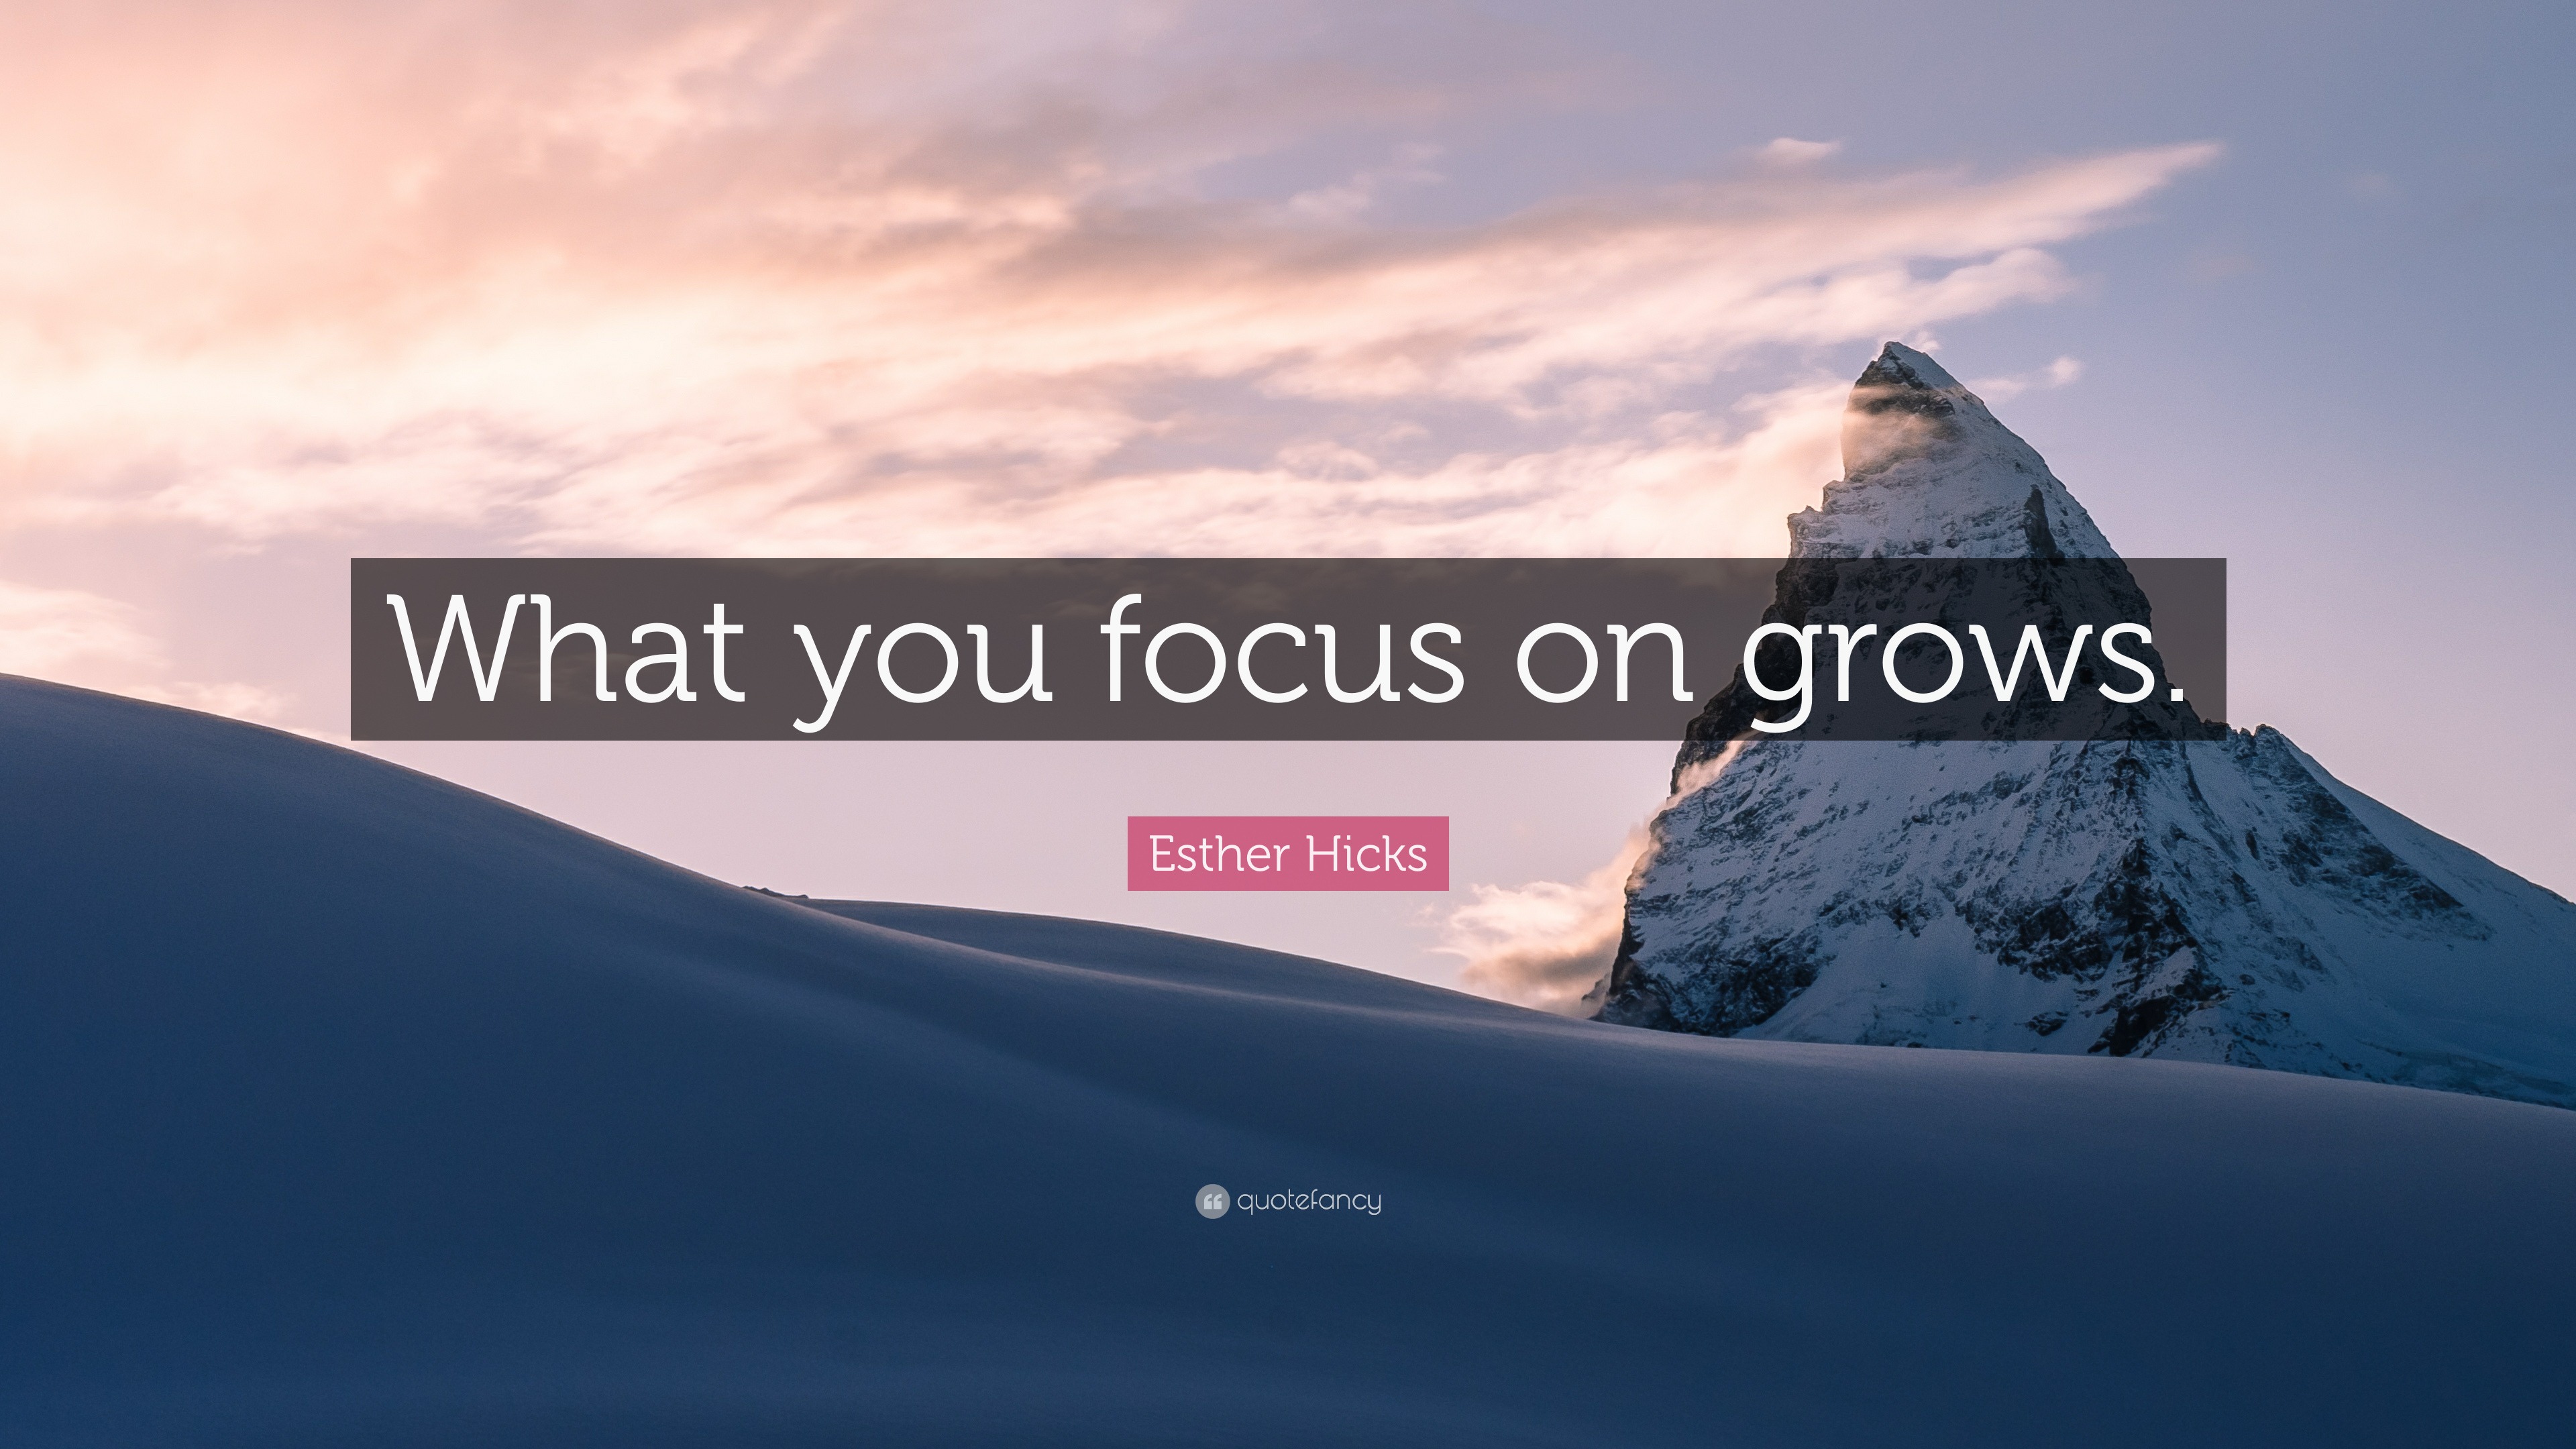 Esther Hicks Quote: “What you focus on grows.”